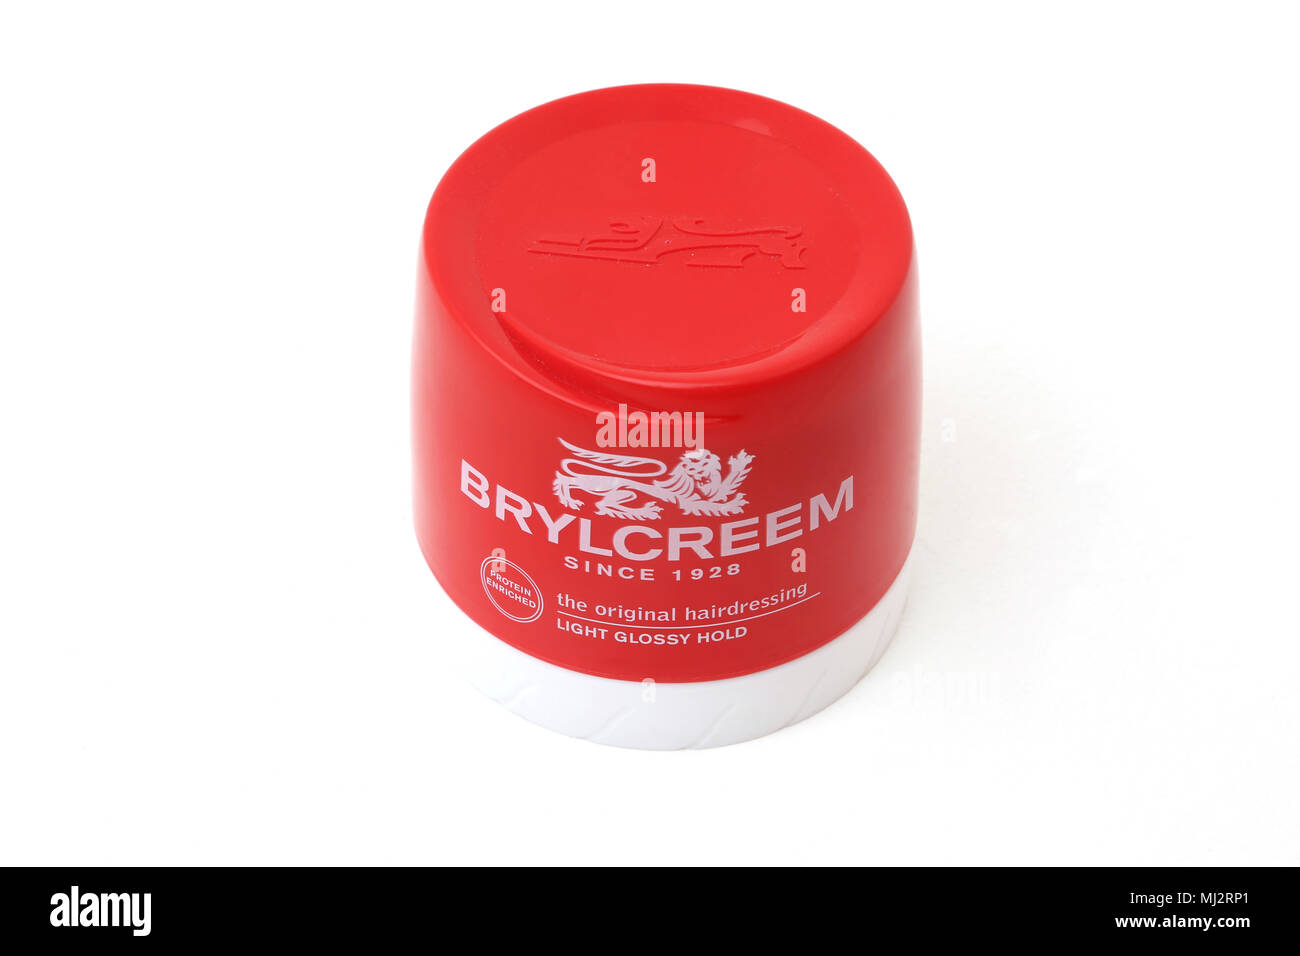 Brylcreem Hair Styling Product Stock Photo - Alamy